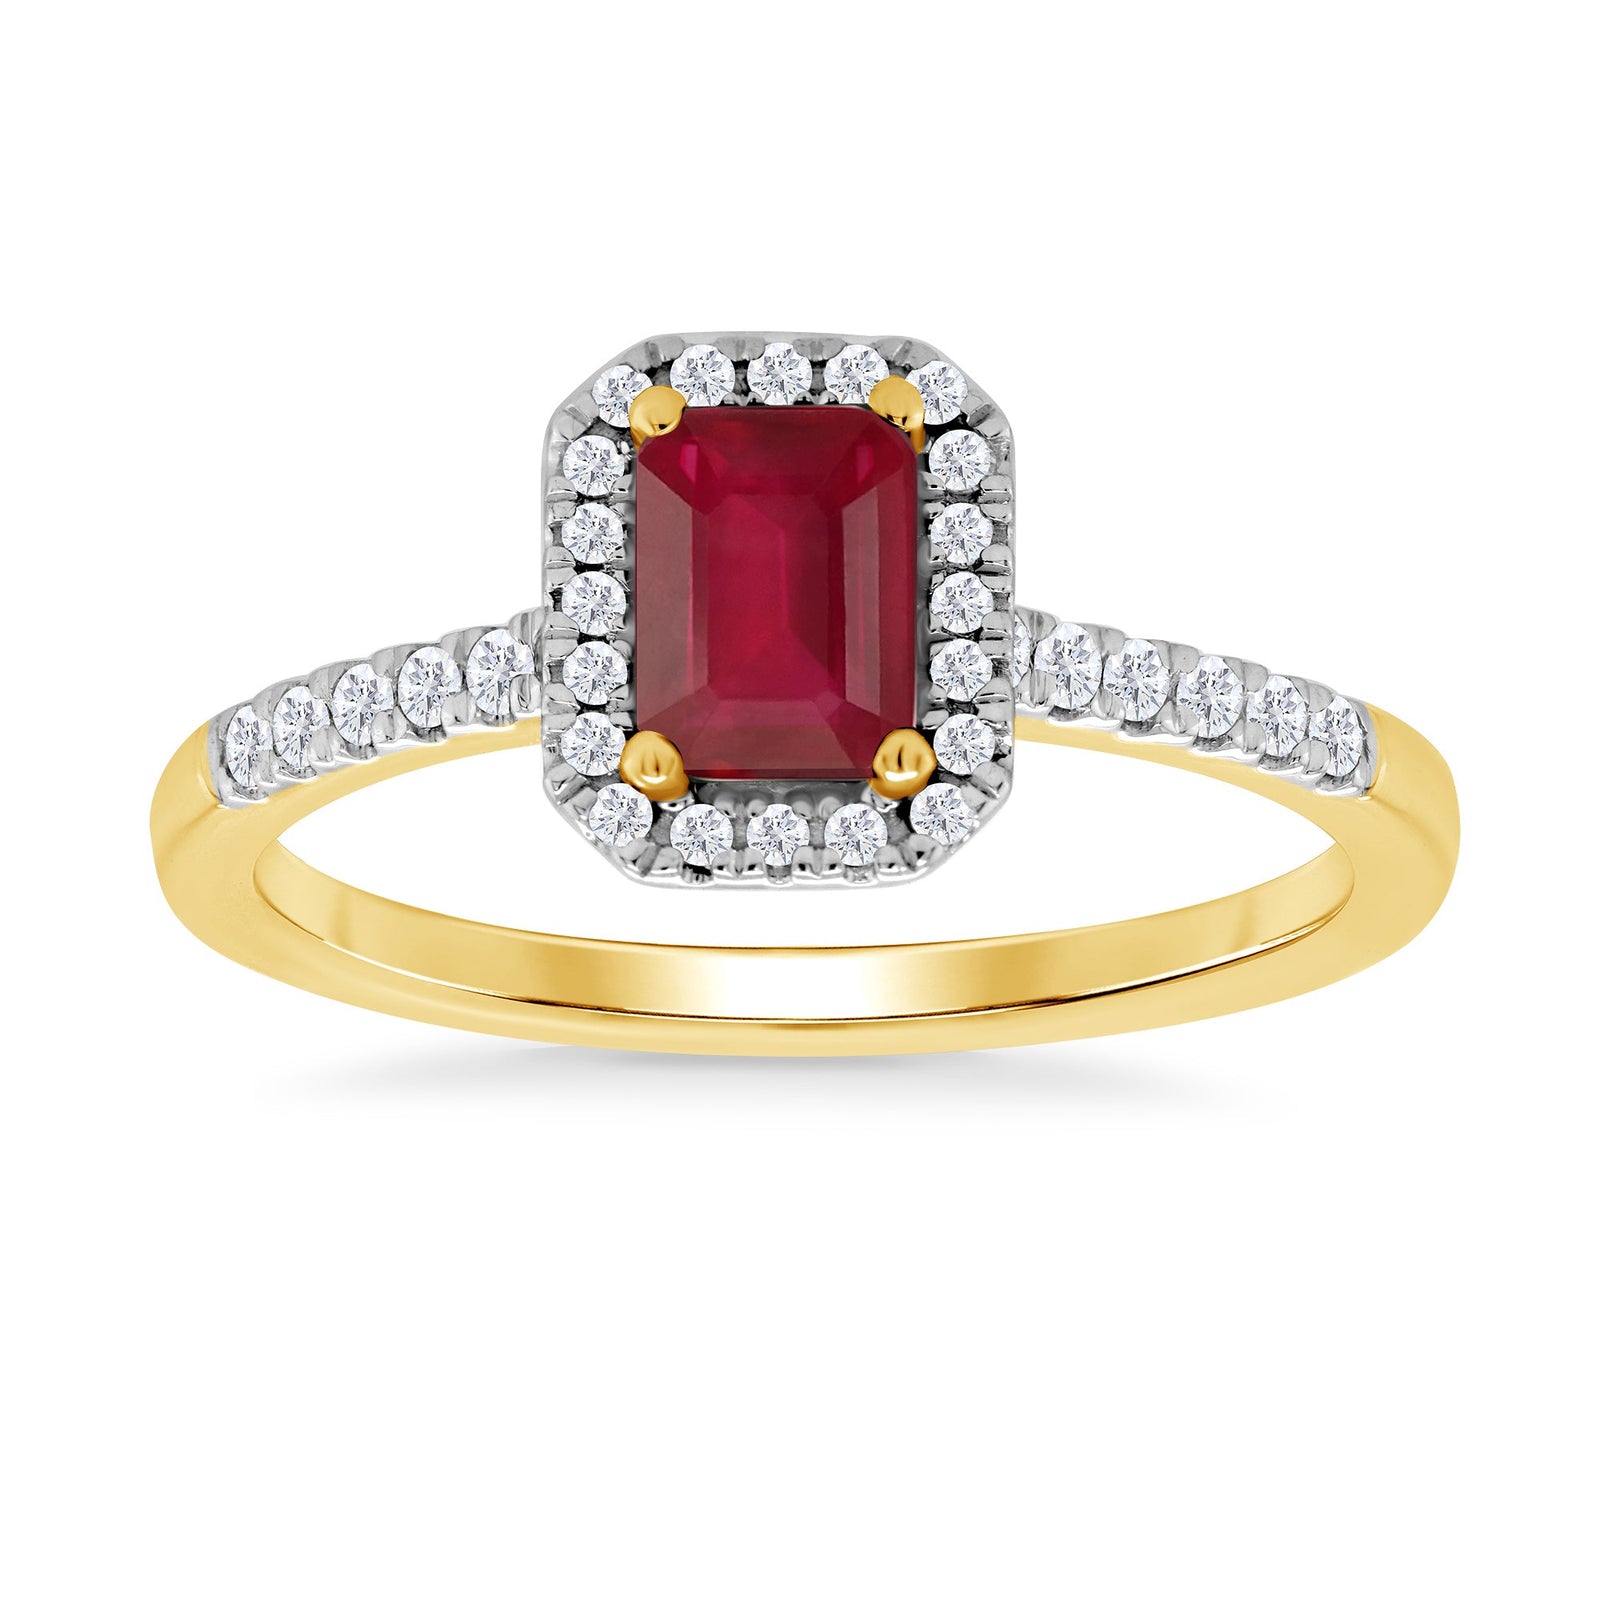 9ct gold 6x4mm octagon ruby & diamond cluster ring with diamond set shoulders 0.20ct